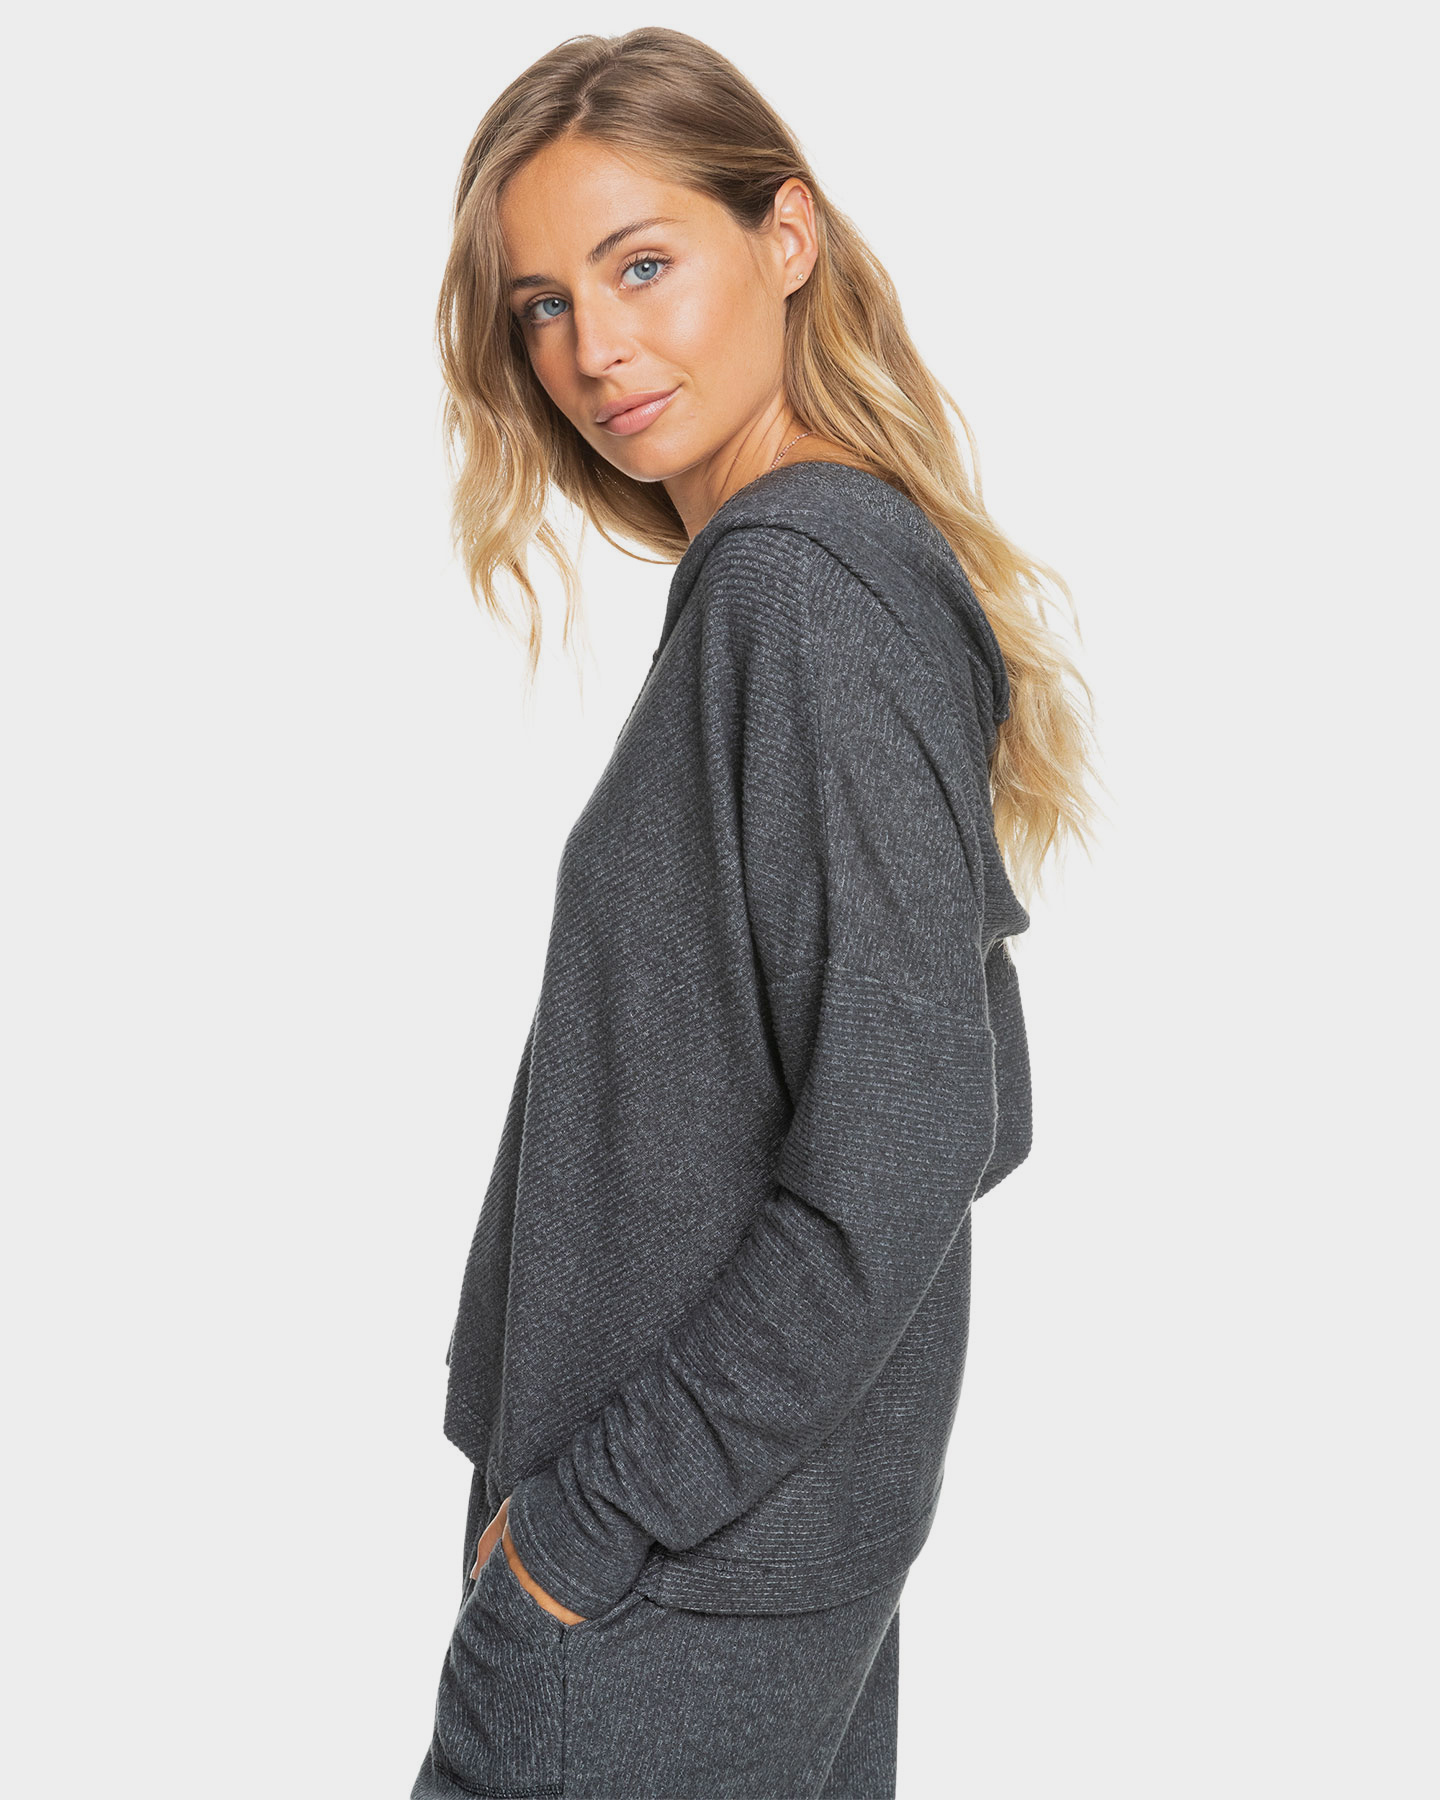 Roxy Just For Chilling Hoodie - Onyx Heather | SurfStitch